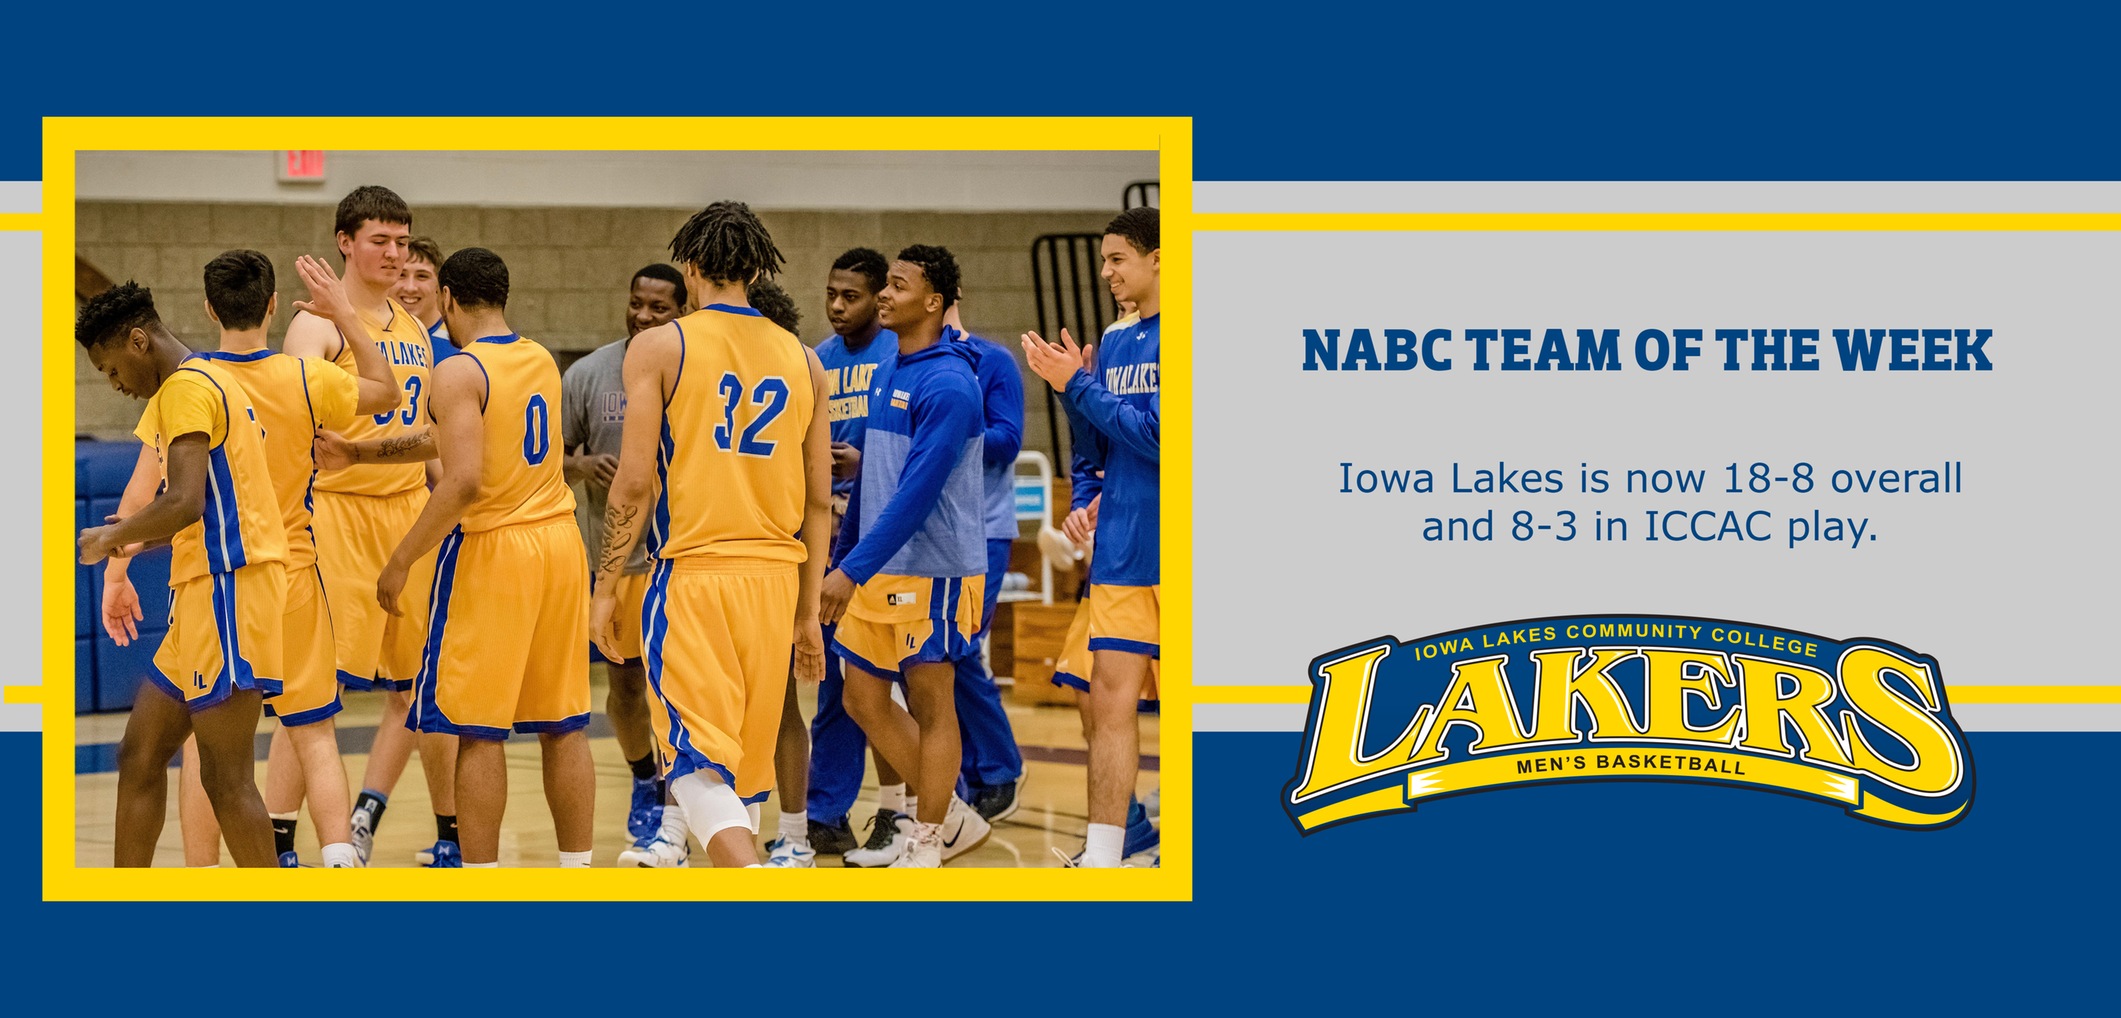 Lakers named National Team of the week for the 2nd time this season